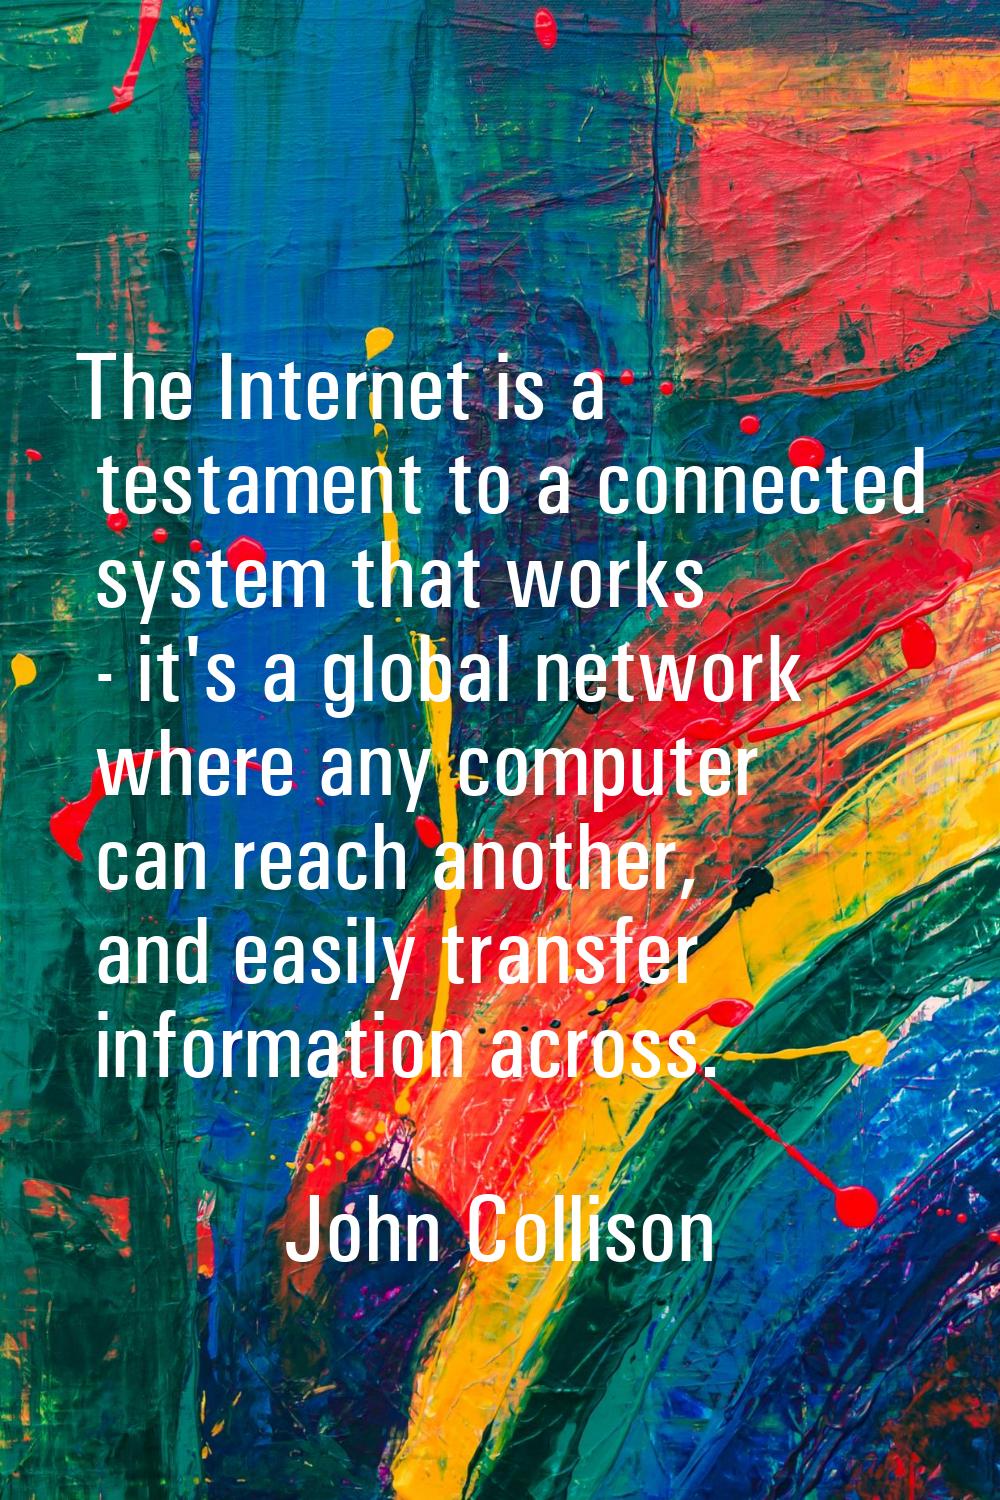 The Internet is a testament to a connected system that works - it's a global network where any comp